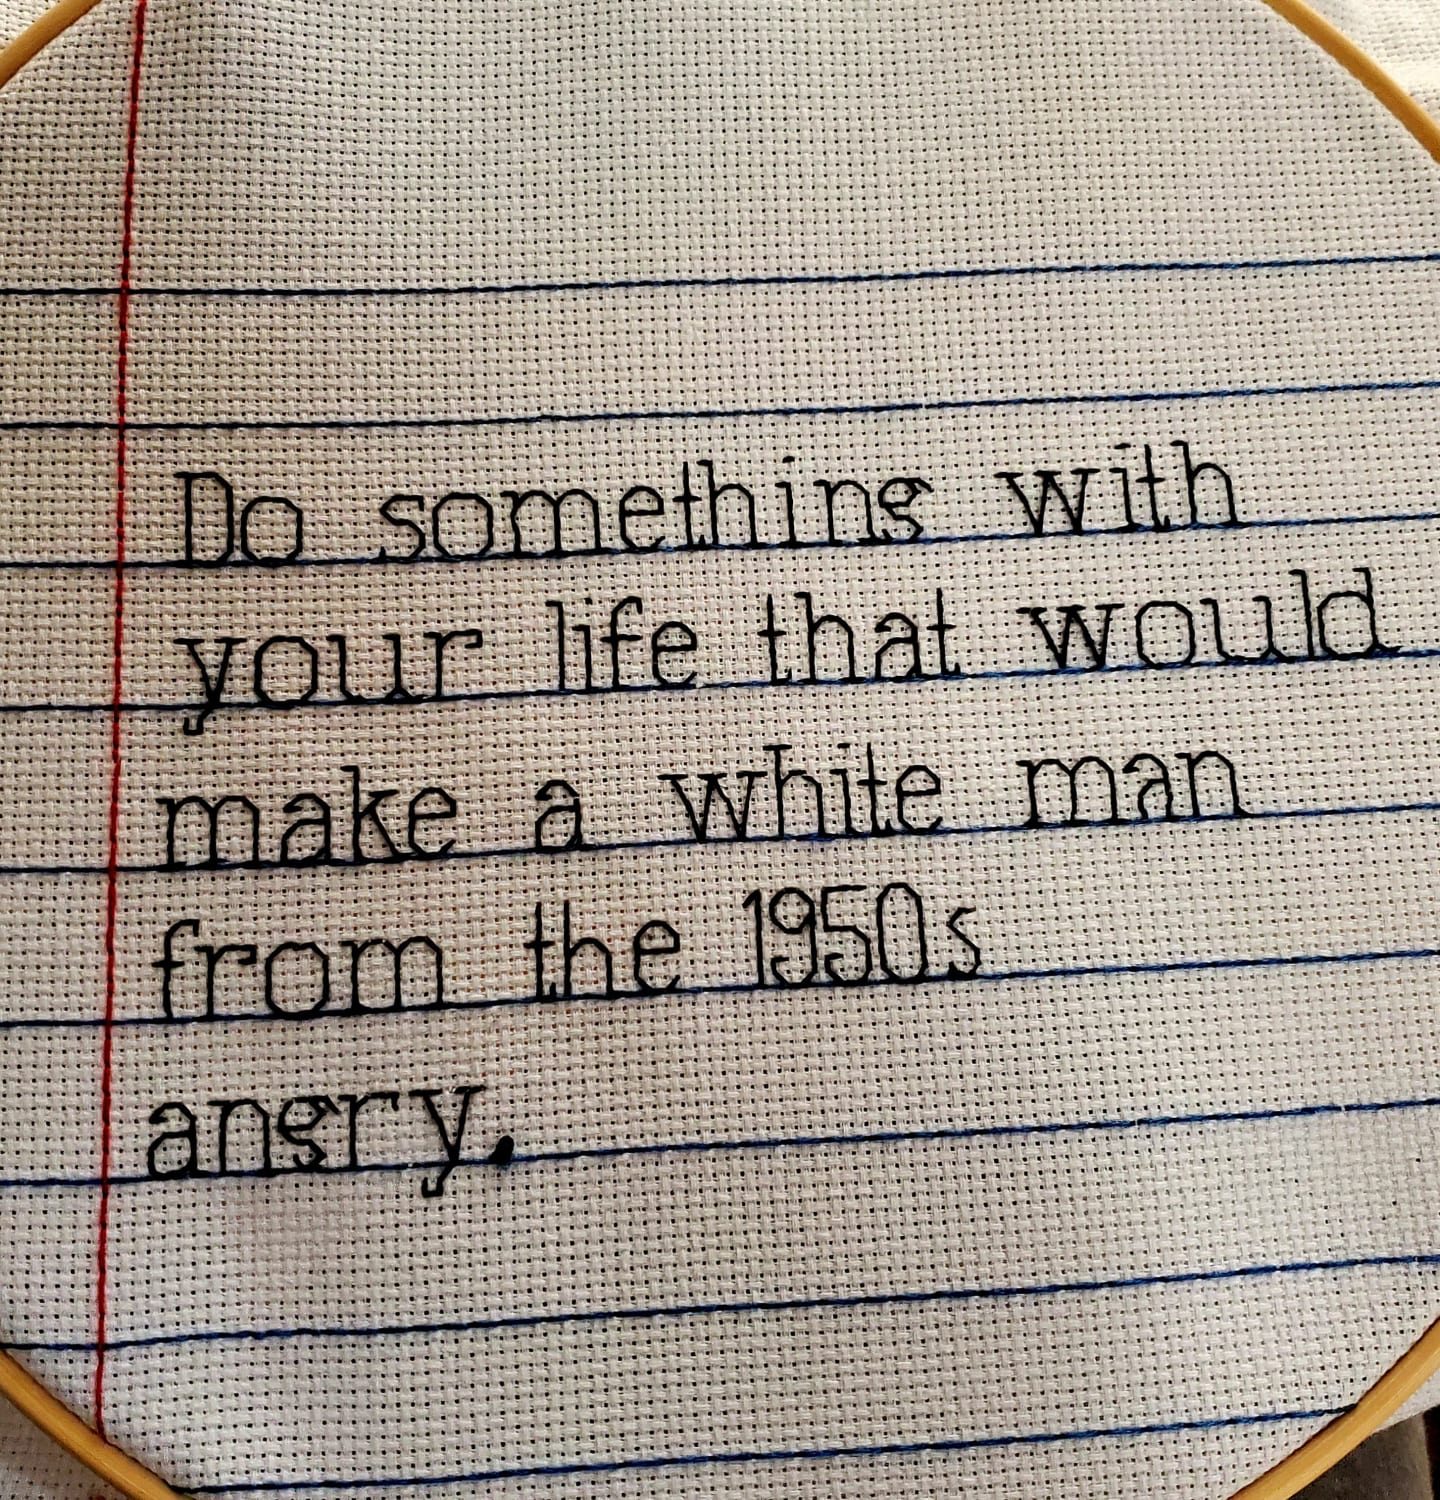 [FO] some freestyle stitching to make the Super Bowl manageable to watch. No pattern, my freestyle inspired by femme bohemian